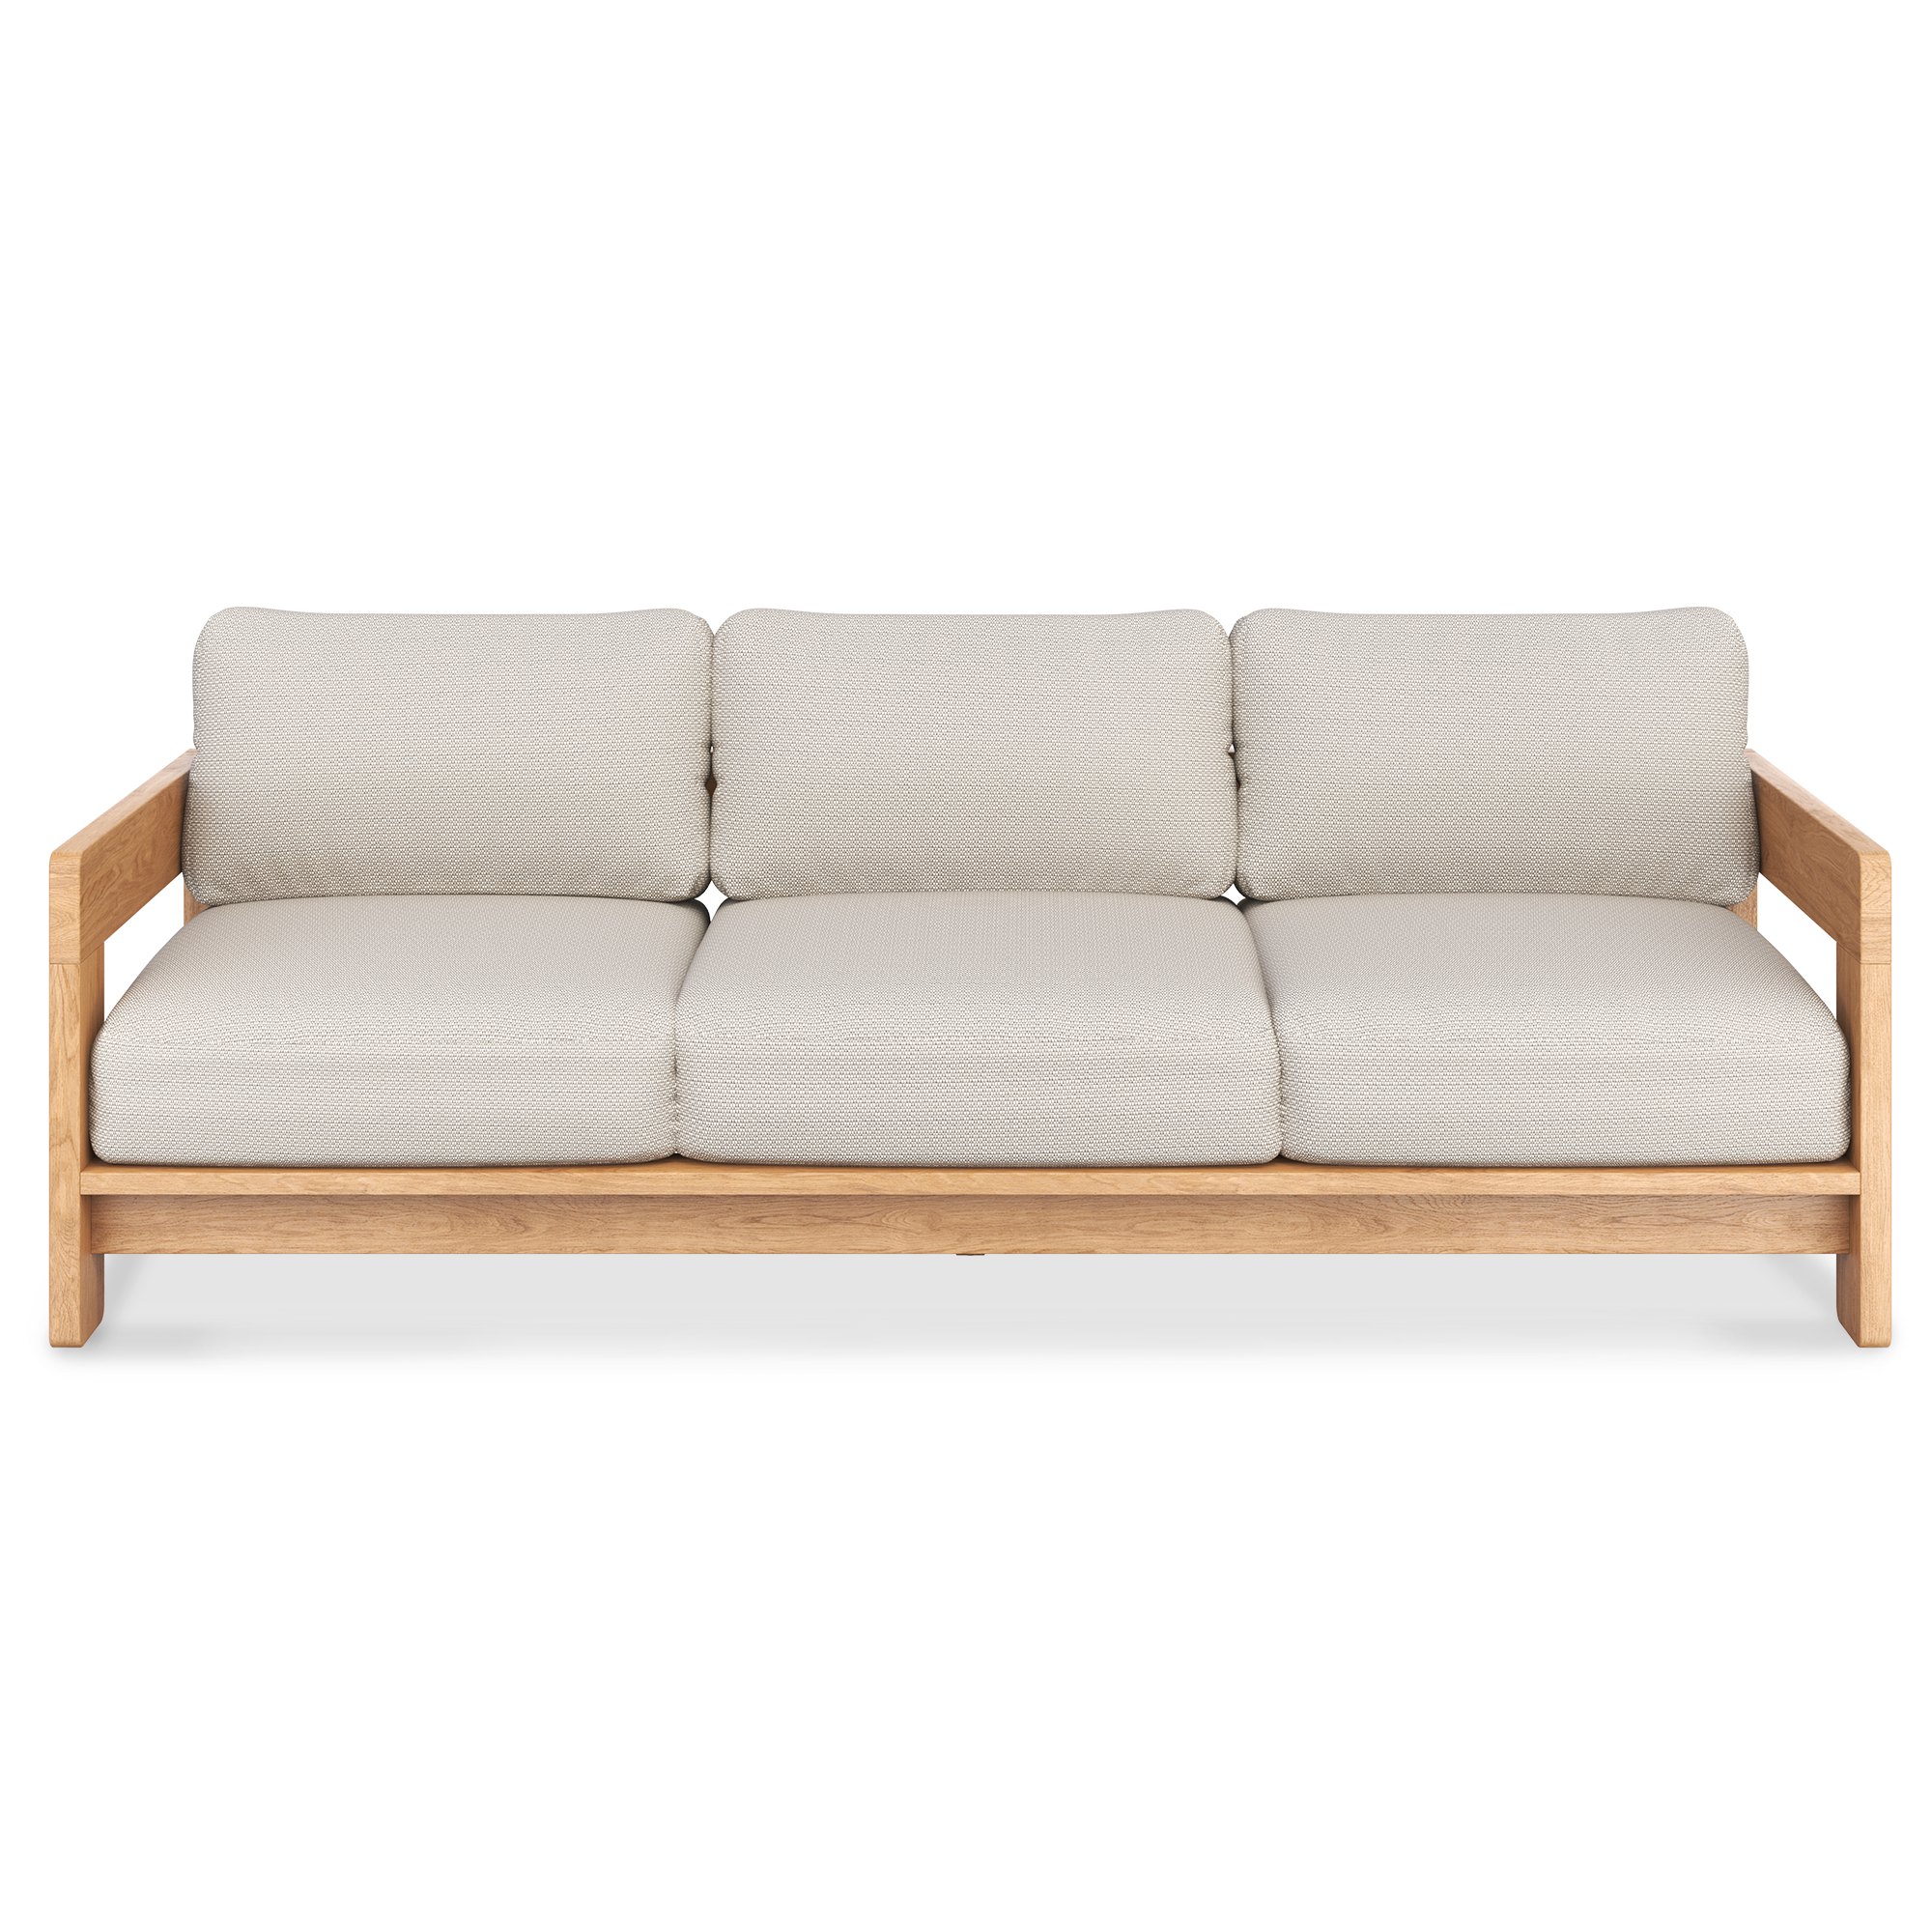 RAE 3 SEATER FRONT BEIGE